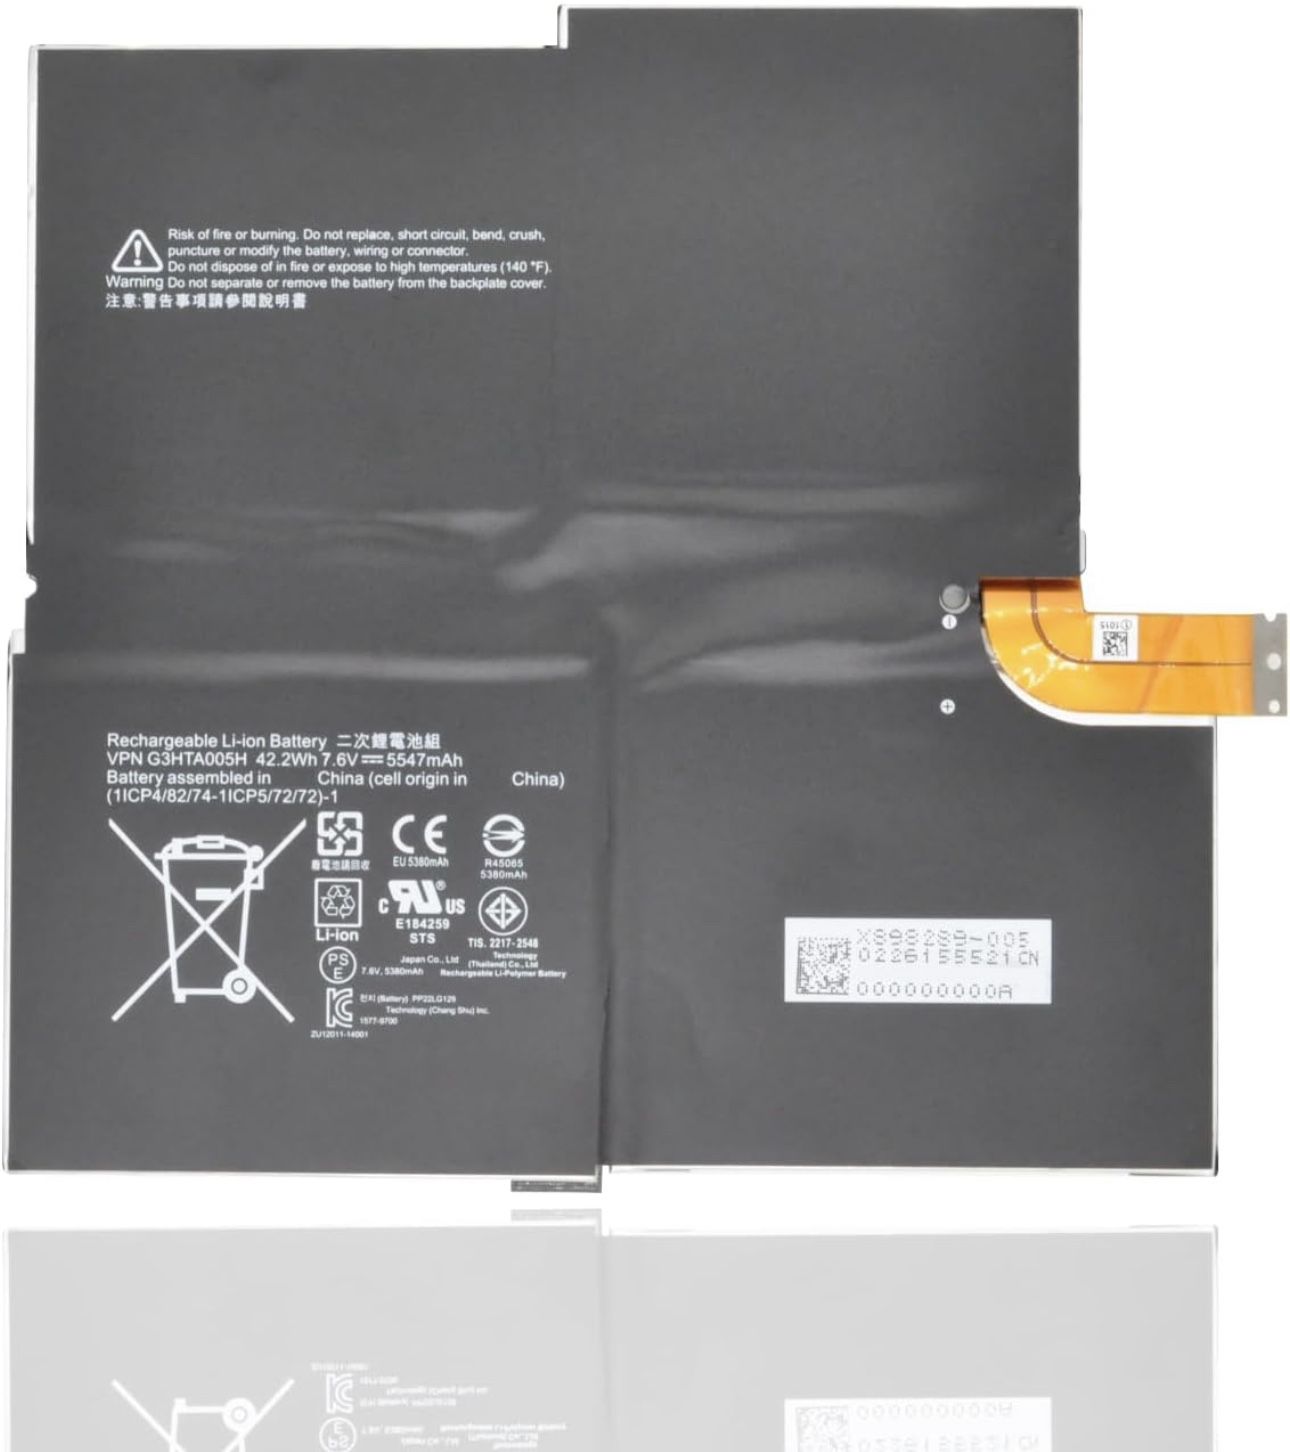 CQCEO G3HTA005H G3HTA009H Tablet Battery for Microsoft Surface PRO 3 1631 Series 1 MS011301-PLP22T02 7.6V 42.2Wh 5547mAh  Brand new never used